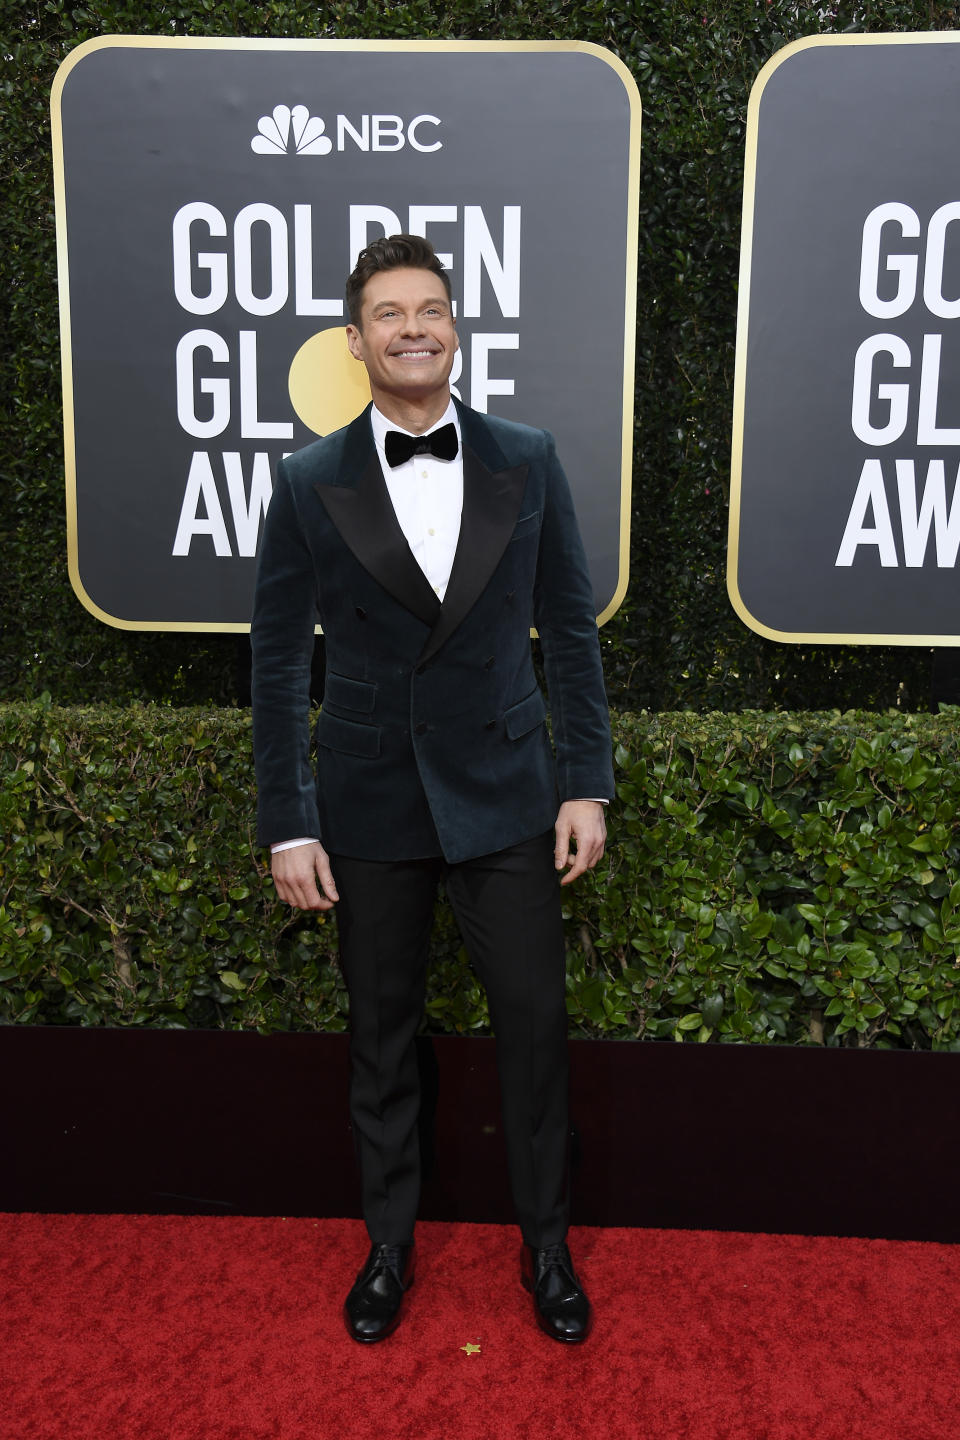 BEVERLY HILLS, CALIFORNIA - JANUARY 05: 77th ANNUAL GOLDEN GLOBE AWARDS -- Pictured: Ryan Seacrest arrives to the 77th Annual Golden Globe Awards held at the Beverly Hilton Hotel on January 5, 2020. -- (Photo by: Kevork Djansezian/NBC/NBCU Photo Bank via Getty Images)